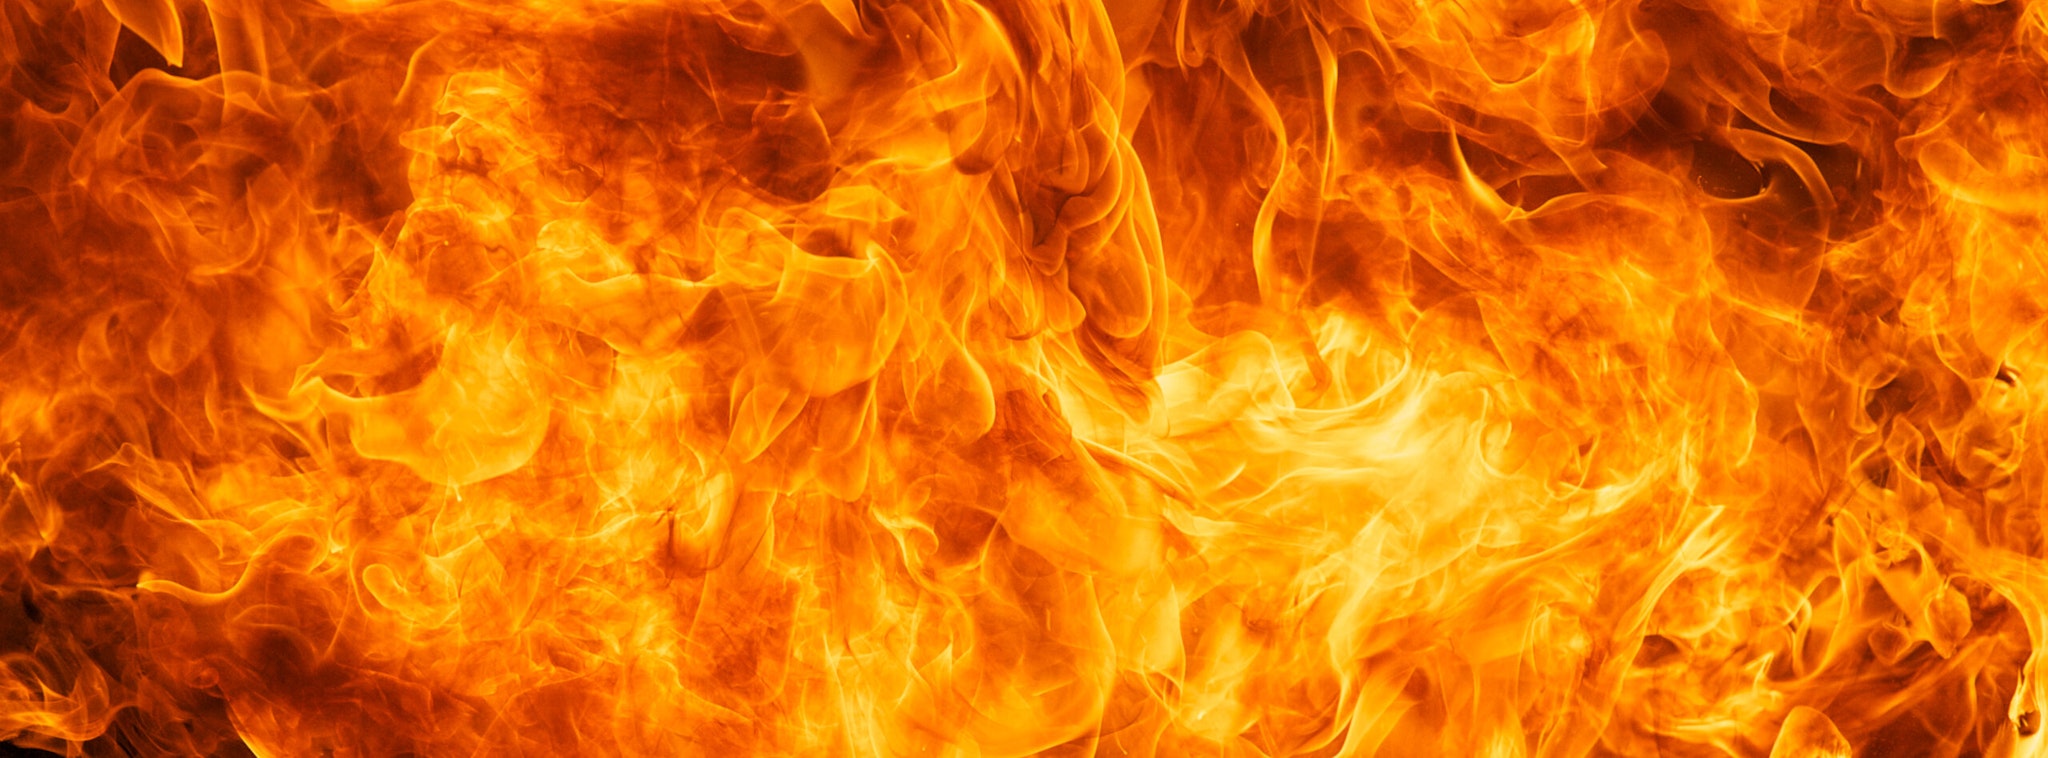 Close-Up Of Fire - stock photo